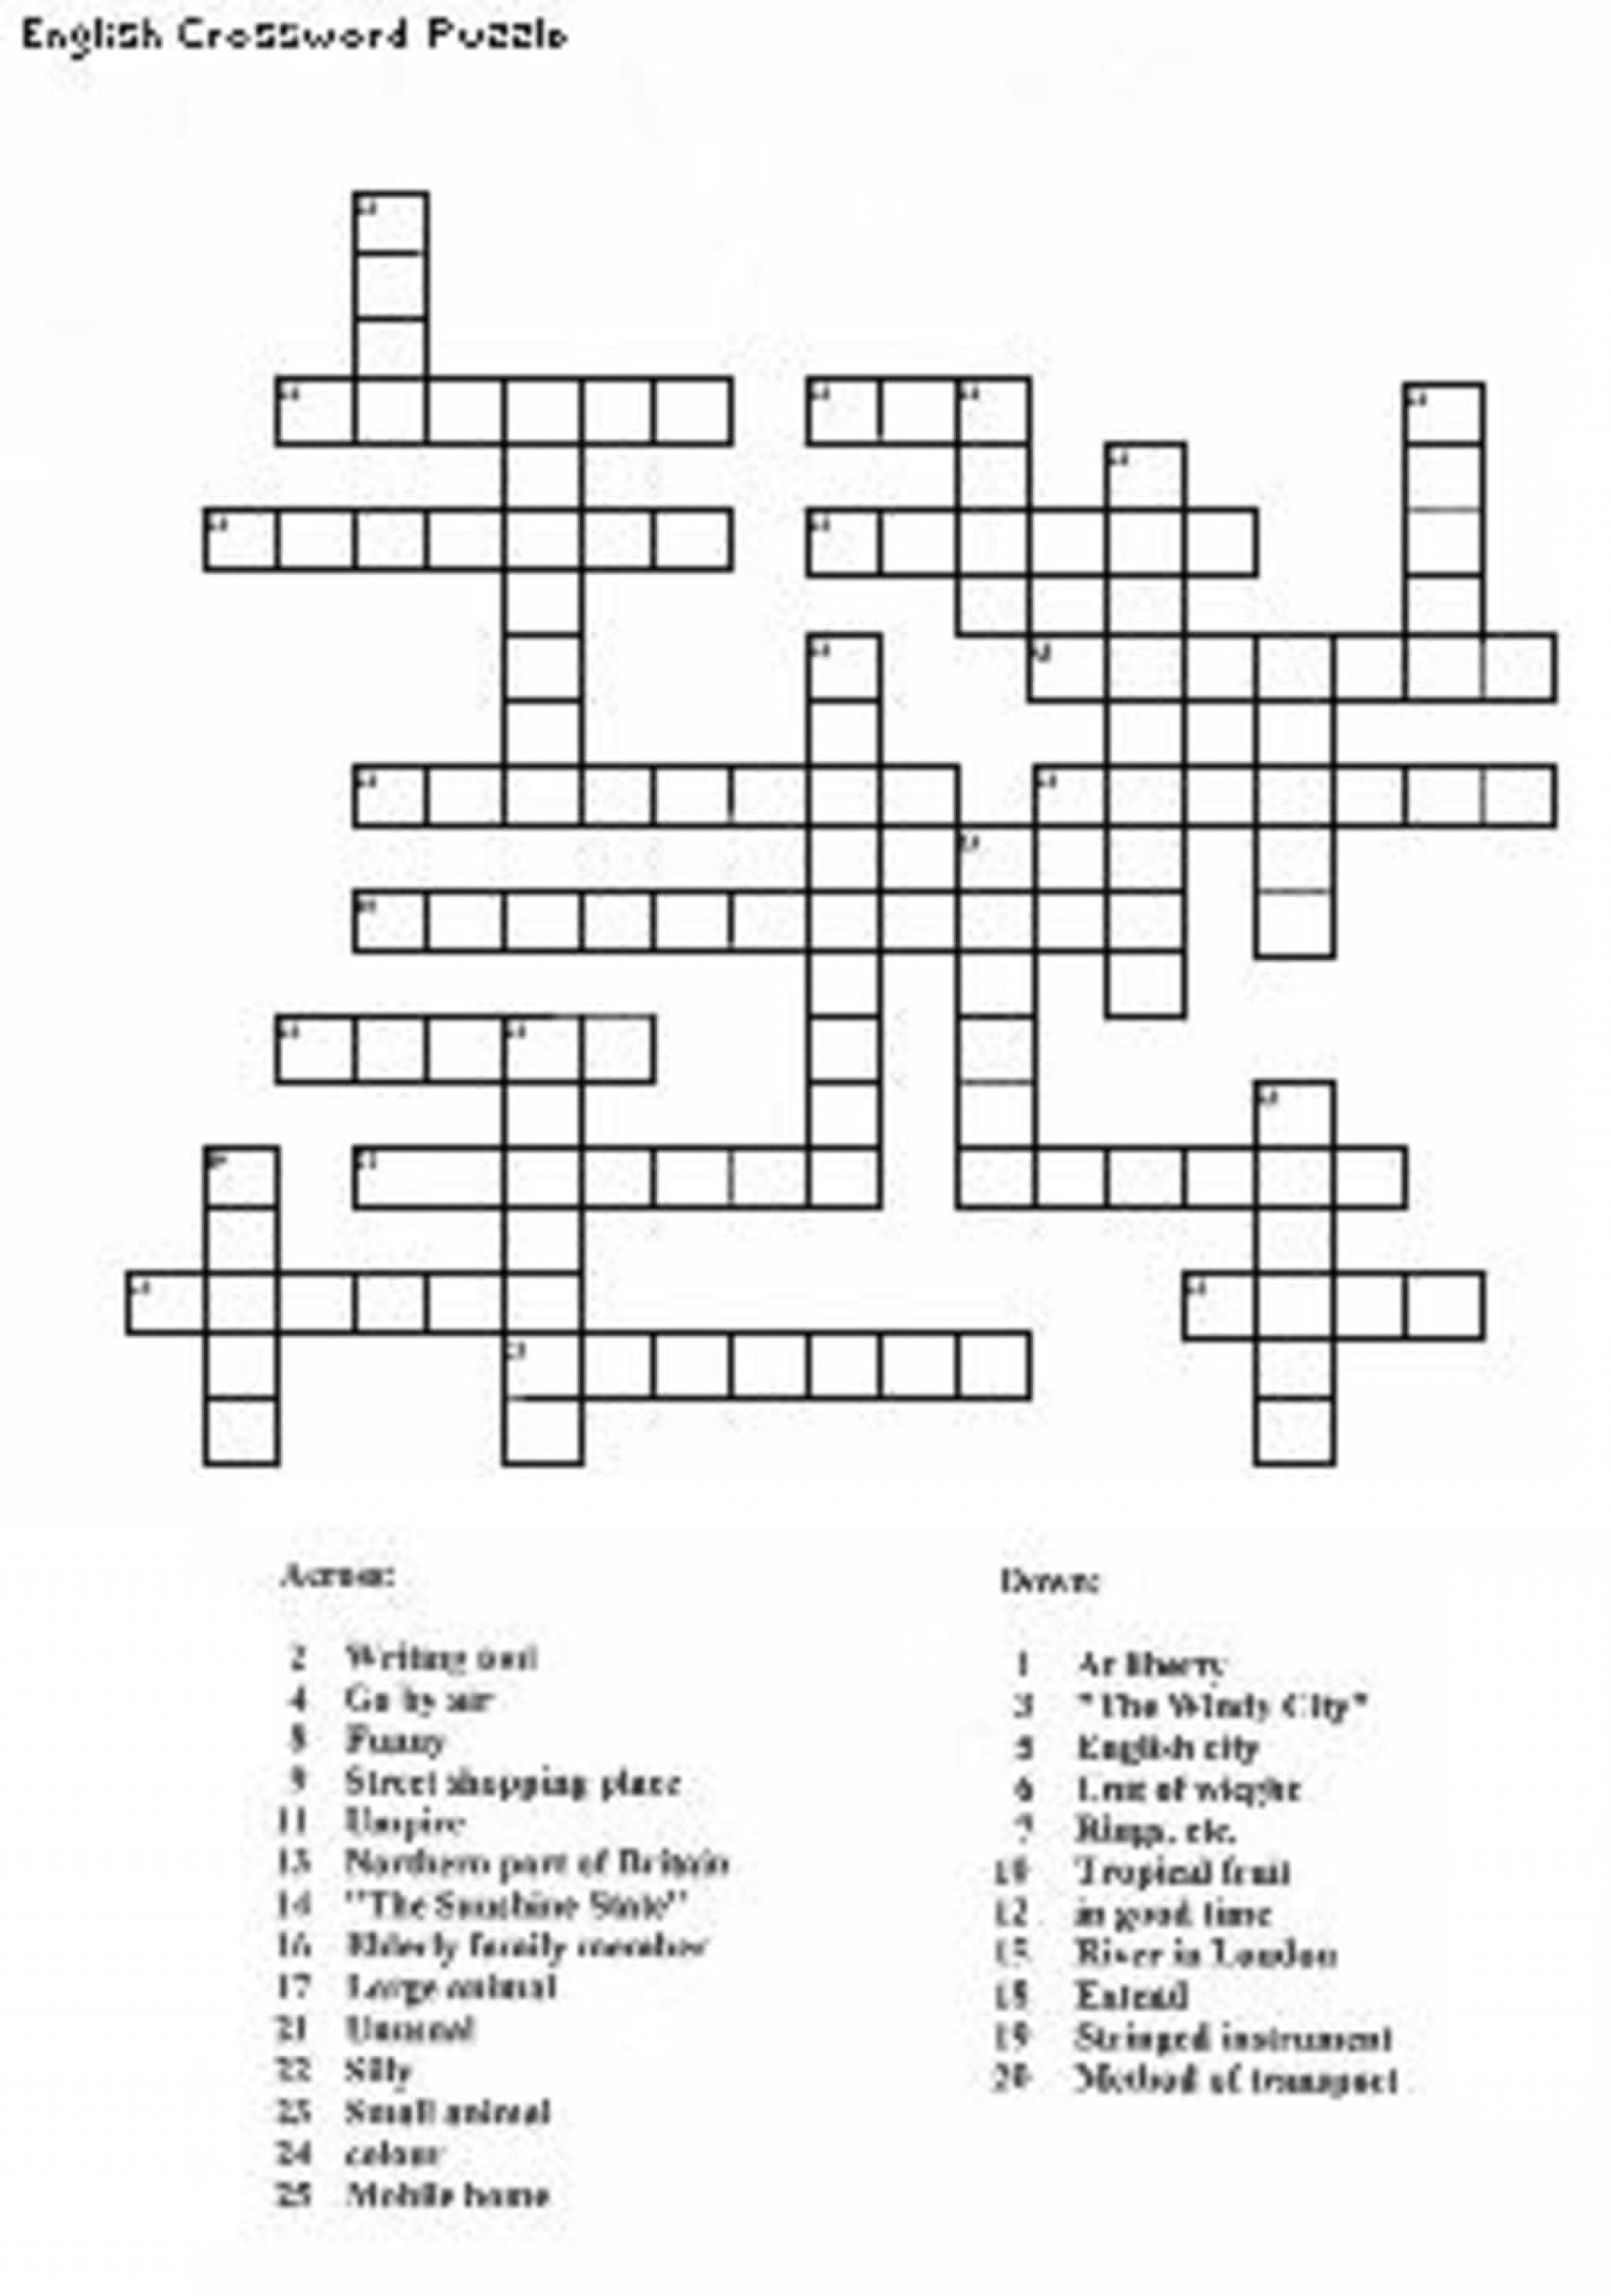 Crossword Puzzle Maker Free Printable Toolbox Screenshot - Create A Crossword Puzzle Free Printable